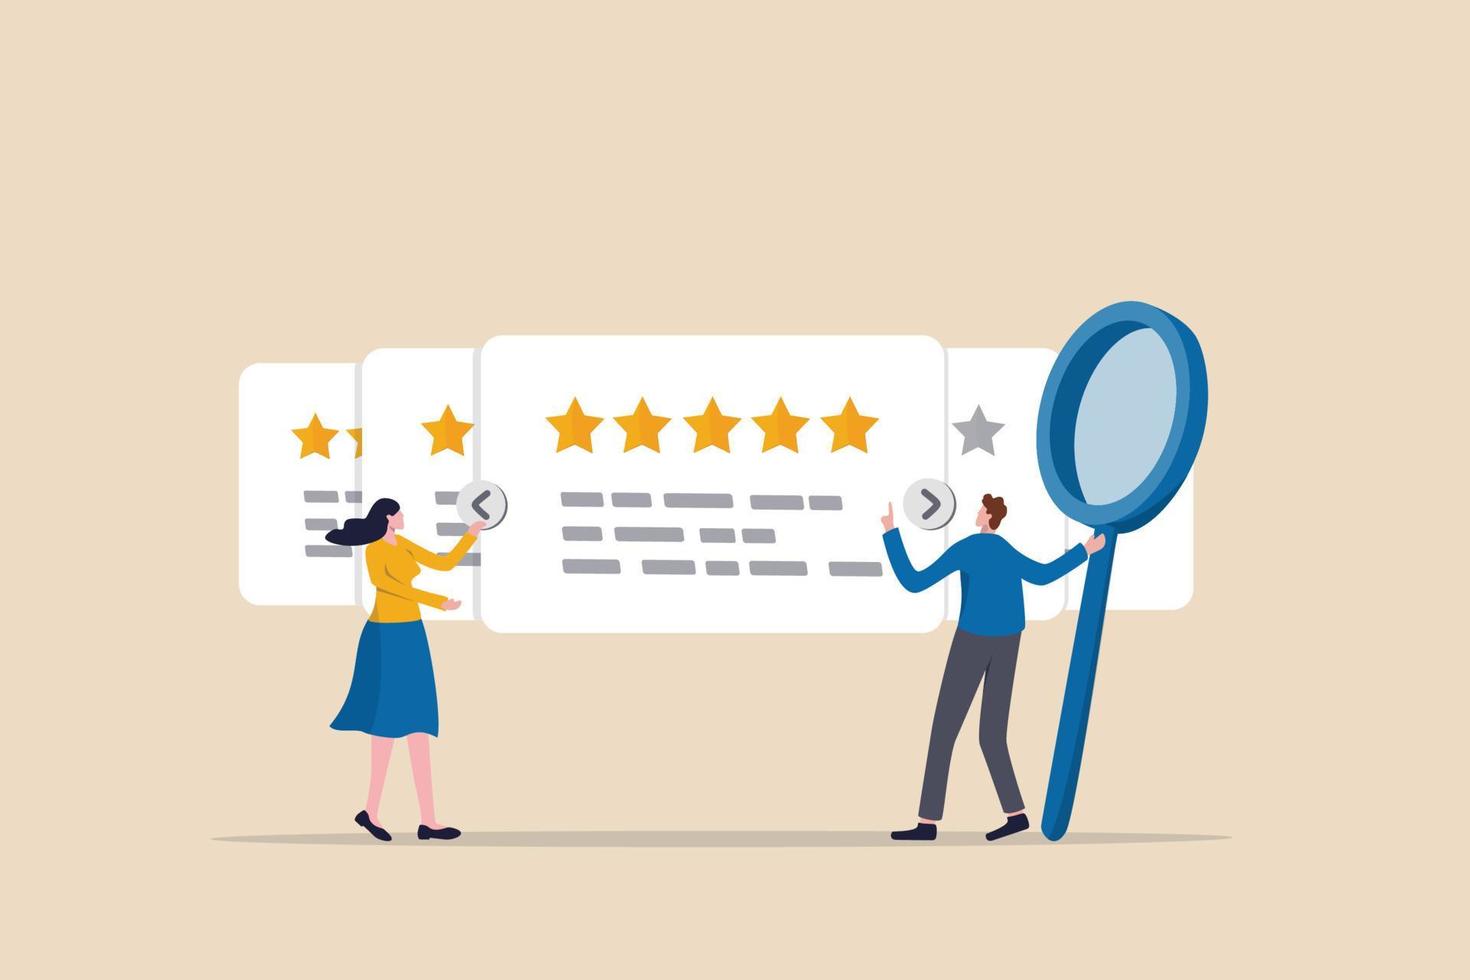 Reputation management team monitor online feedback rating to improve brand positive rank and gain customer trust concept, marketing team monitor and analyze stars rating to increase satisfaction. vector